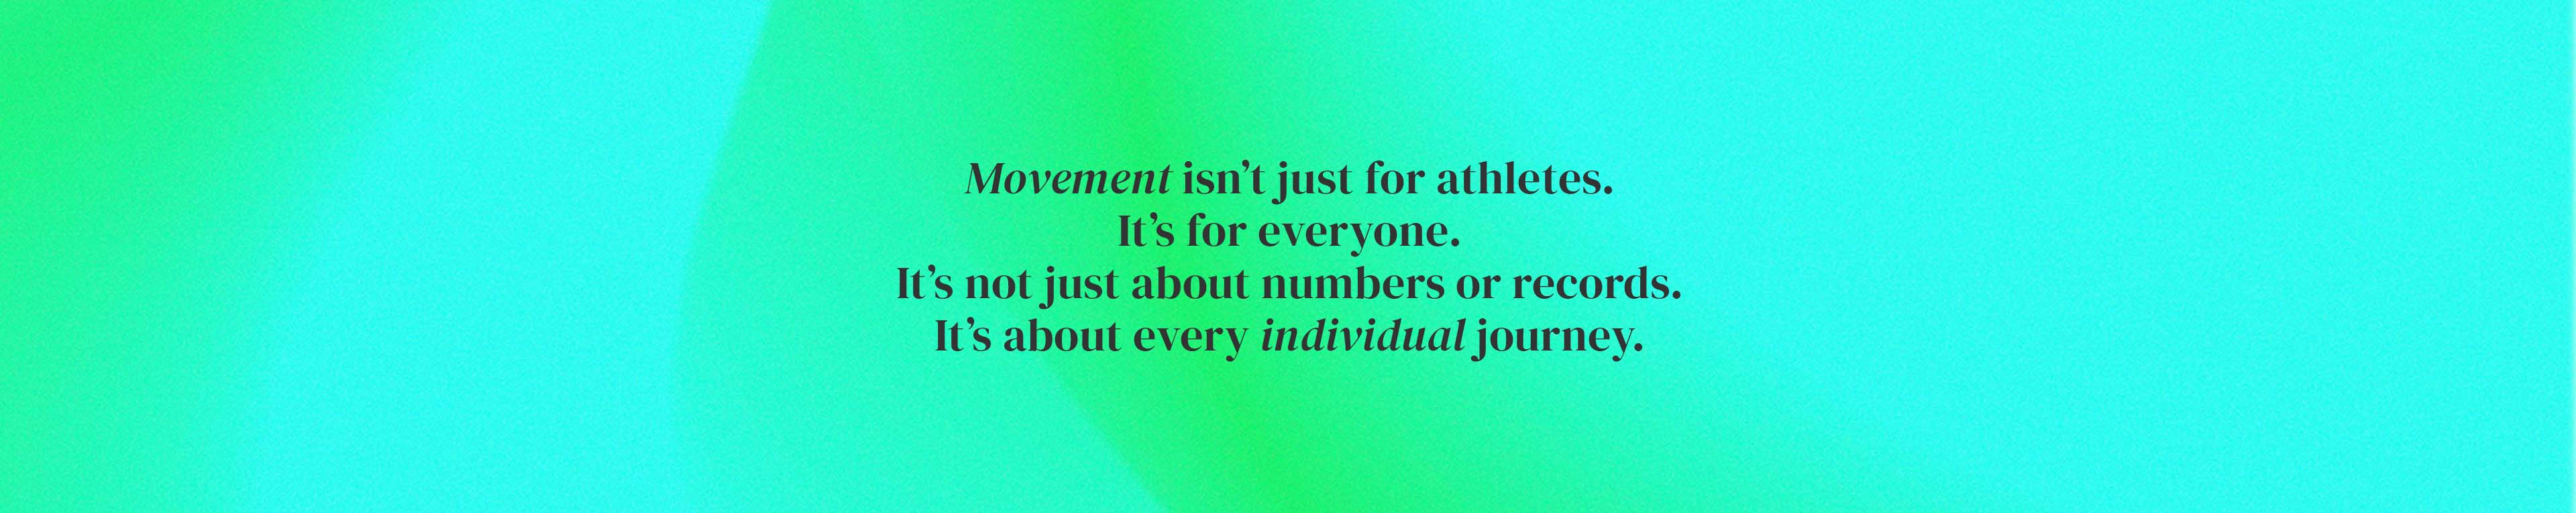 Movement isn't just for athletes. it's for everyone. It's not just about numbers or records. It's about every individual journey.